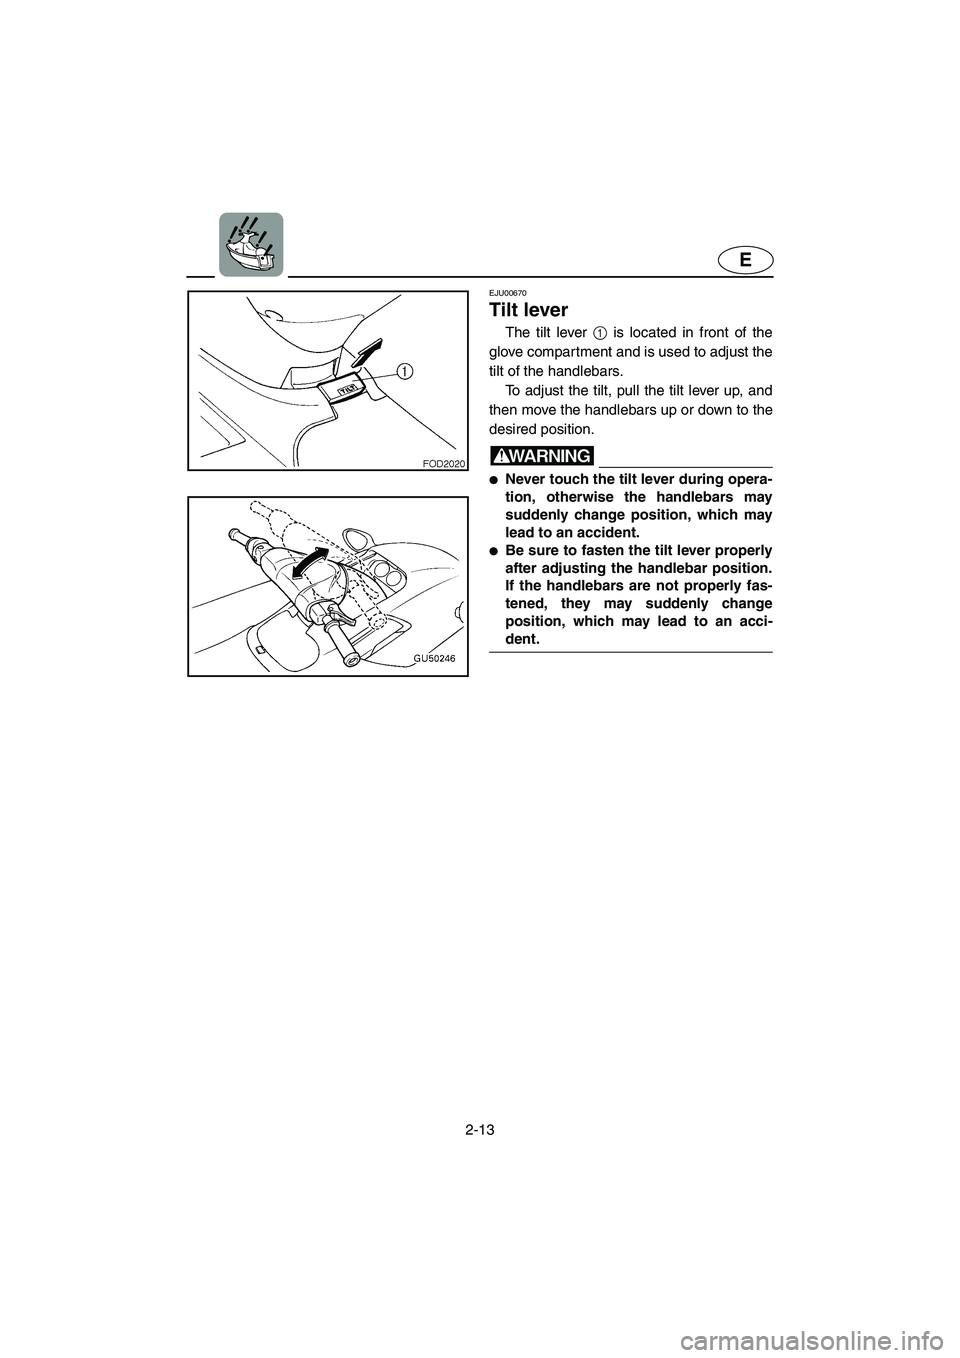 YAMAHA XL 800 2001  Owners Manual 2-13
E
EJU00670
Tilt lever
The tilt lever 1 is located in front of the
glove compartment and is used to adjust the
tilt of the handlebars. 
To adjust the tilt, pull the tilt lever up, and
then move th